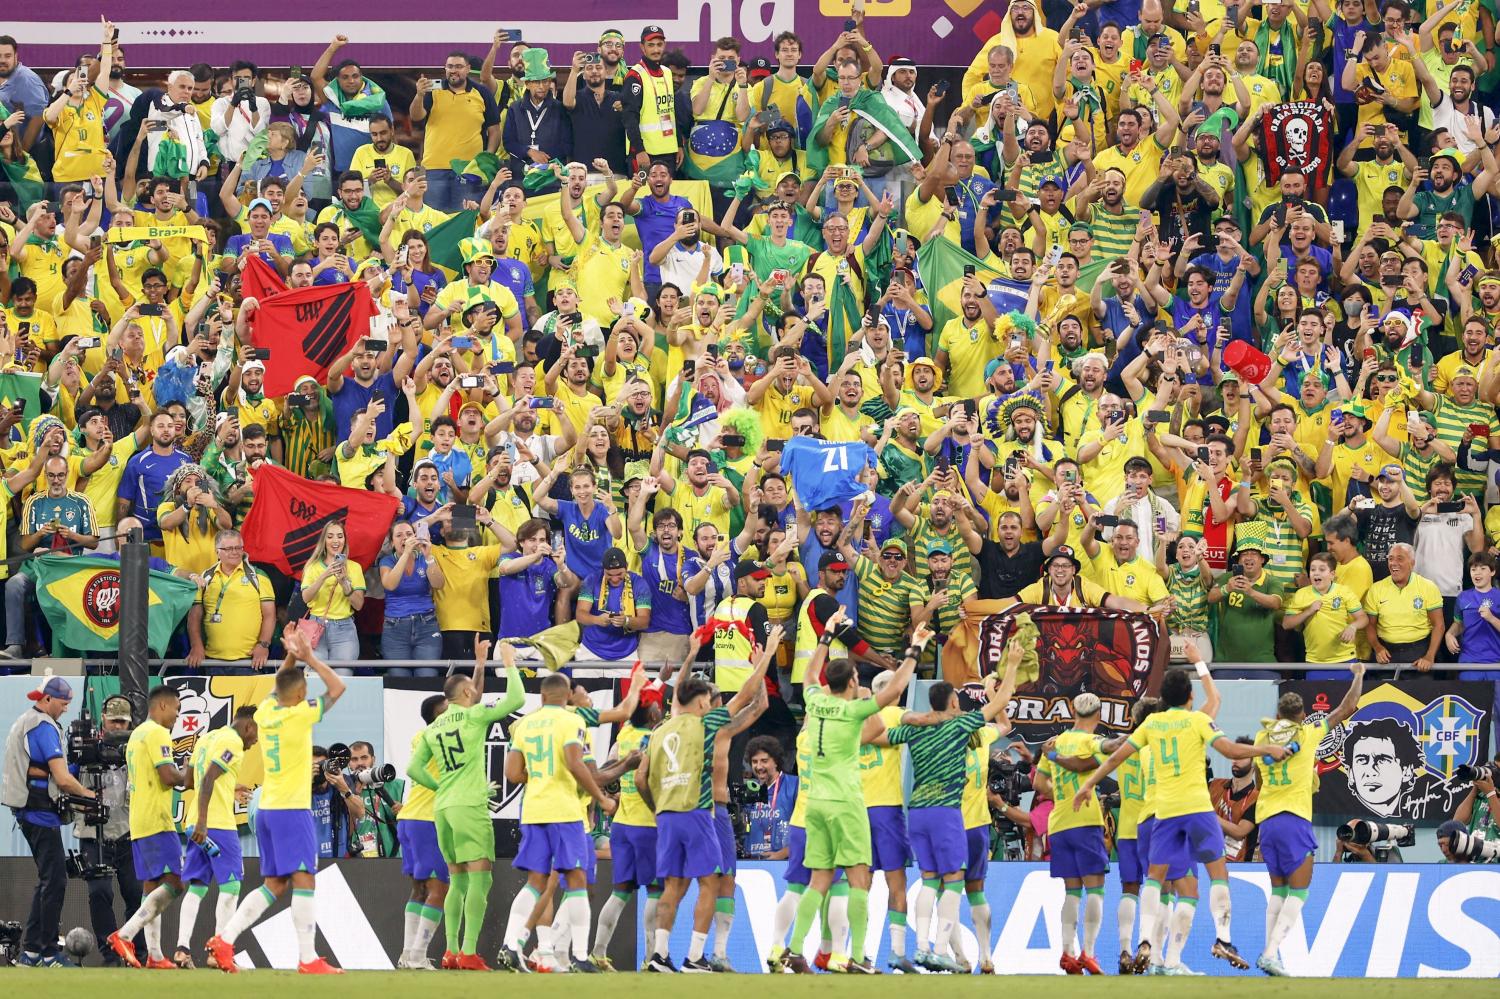 Brazil supporters celebrate after their team's 1-0 win over Switzerland in a World Cup Group G football match at Stadium 974 in Doha, Qatar, on Nov. 28, 2022. Brazil advanced to the knockout stage. (Kyodo)
==Kyodo
NO USE JAPAN